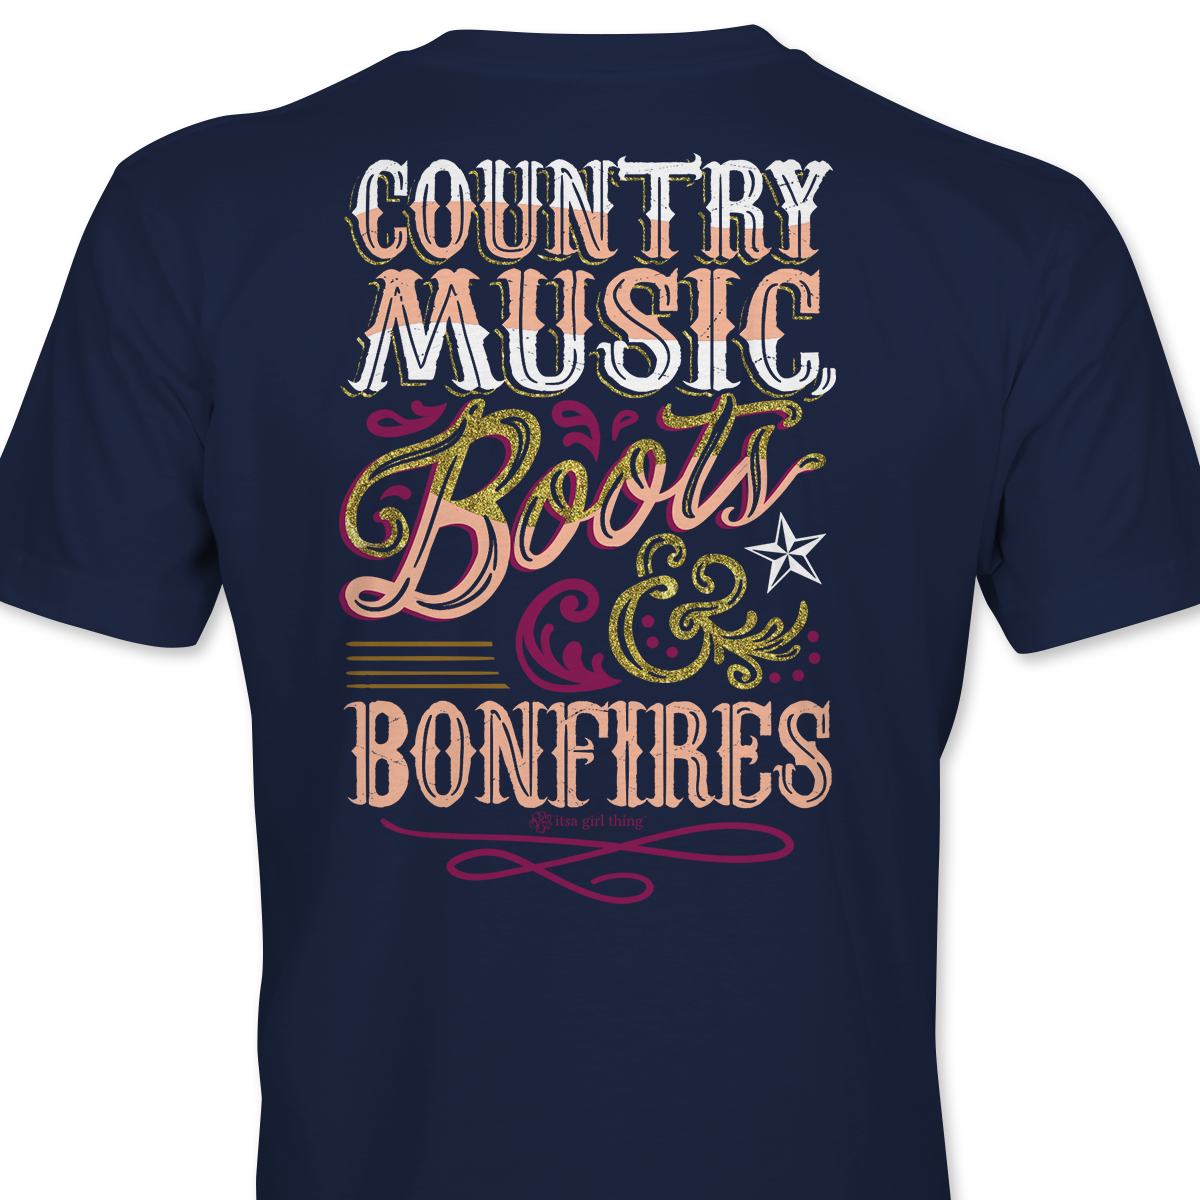 Country Music, Boots, Bonfires- Southern Nights T-Shirt